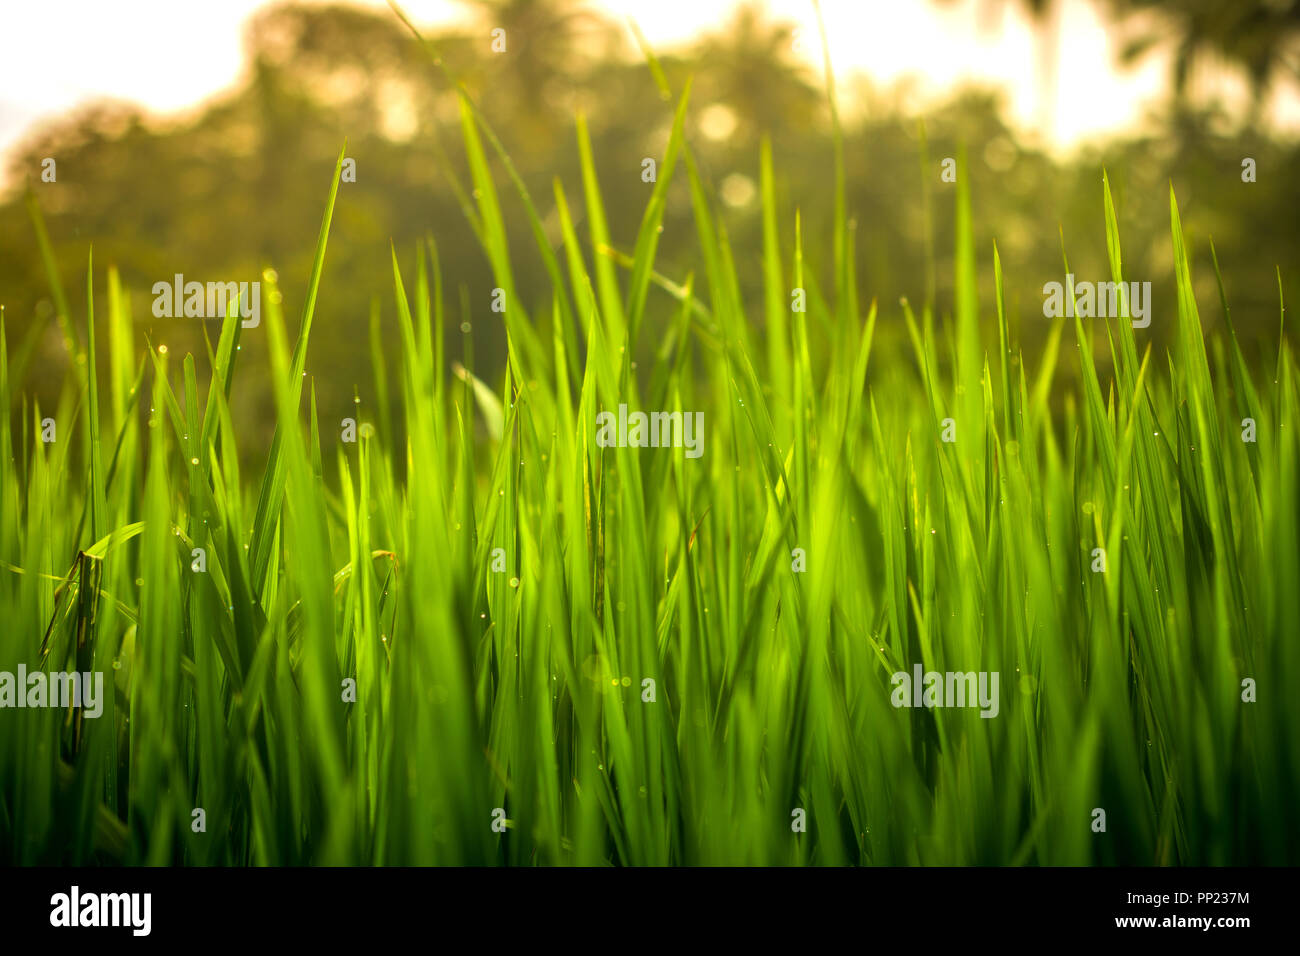 Green Grass with Water Drops, Rice Field, Natural Background Stock Photo